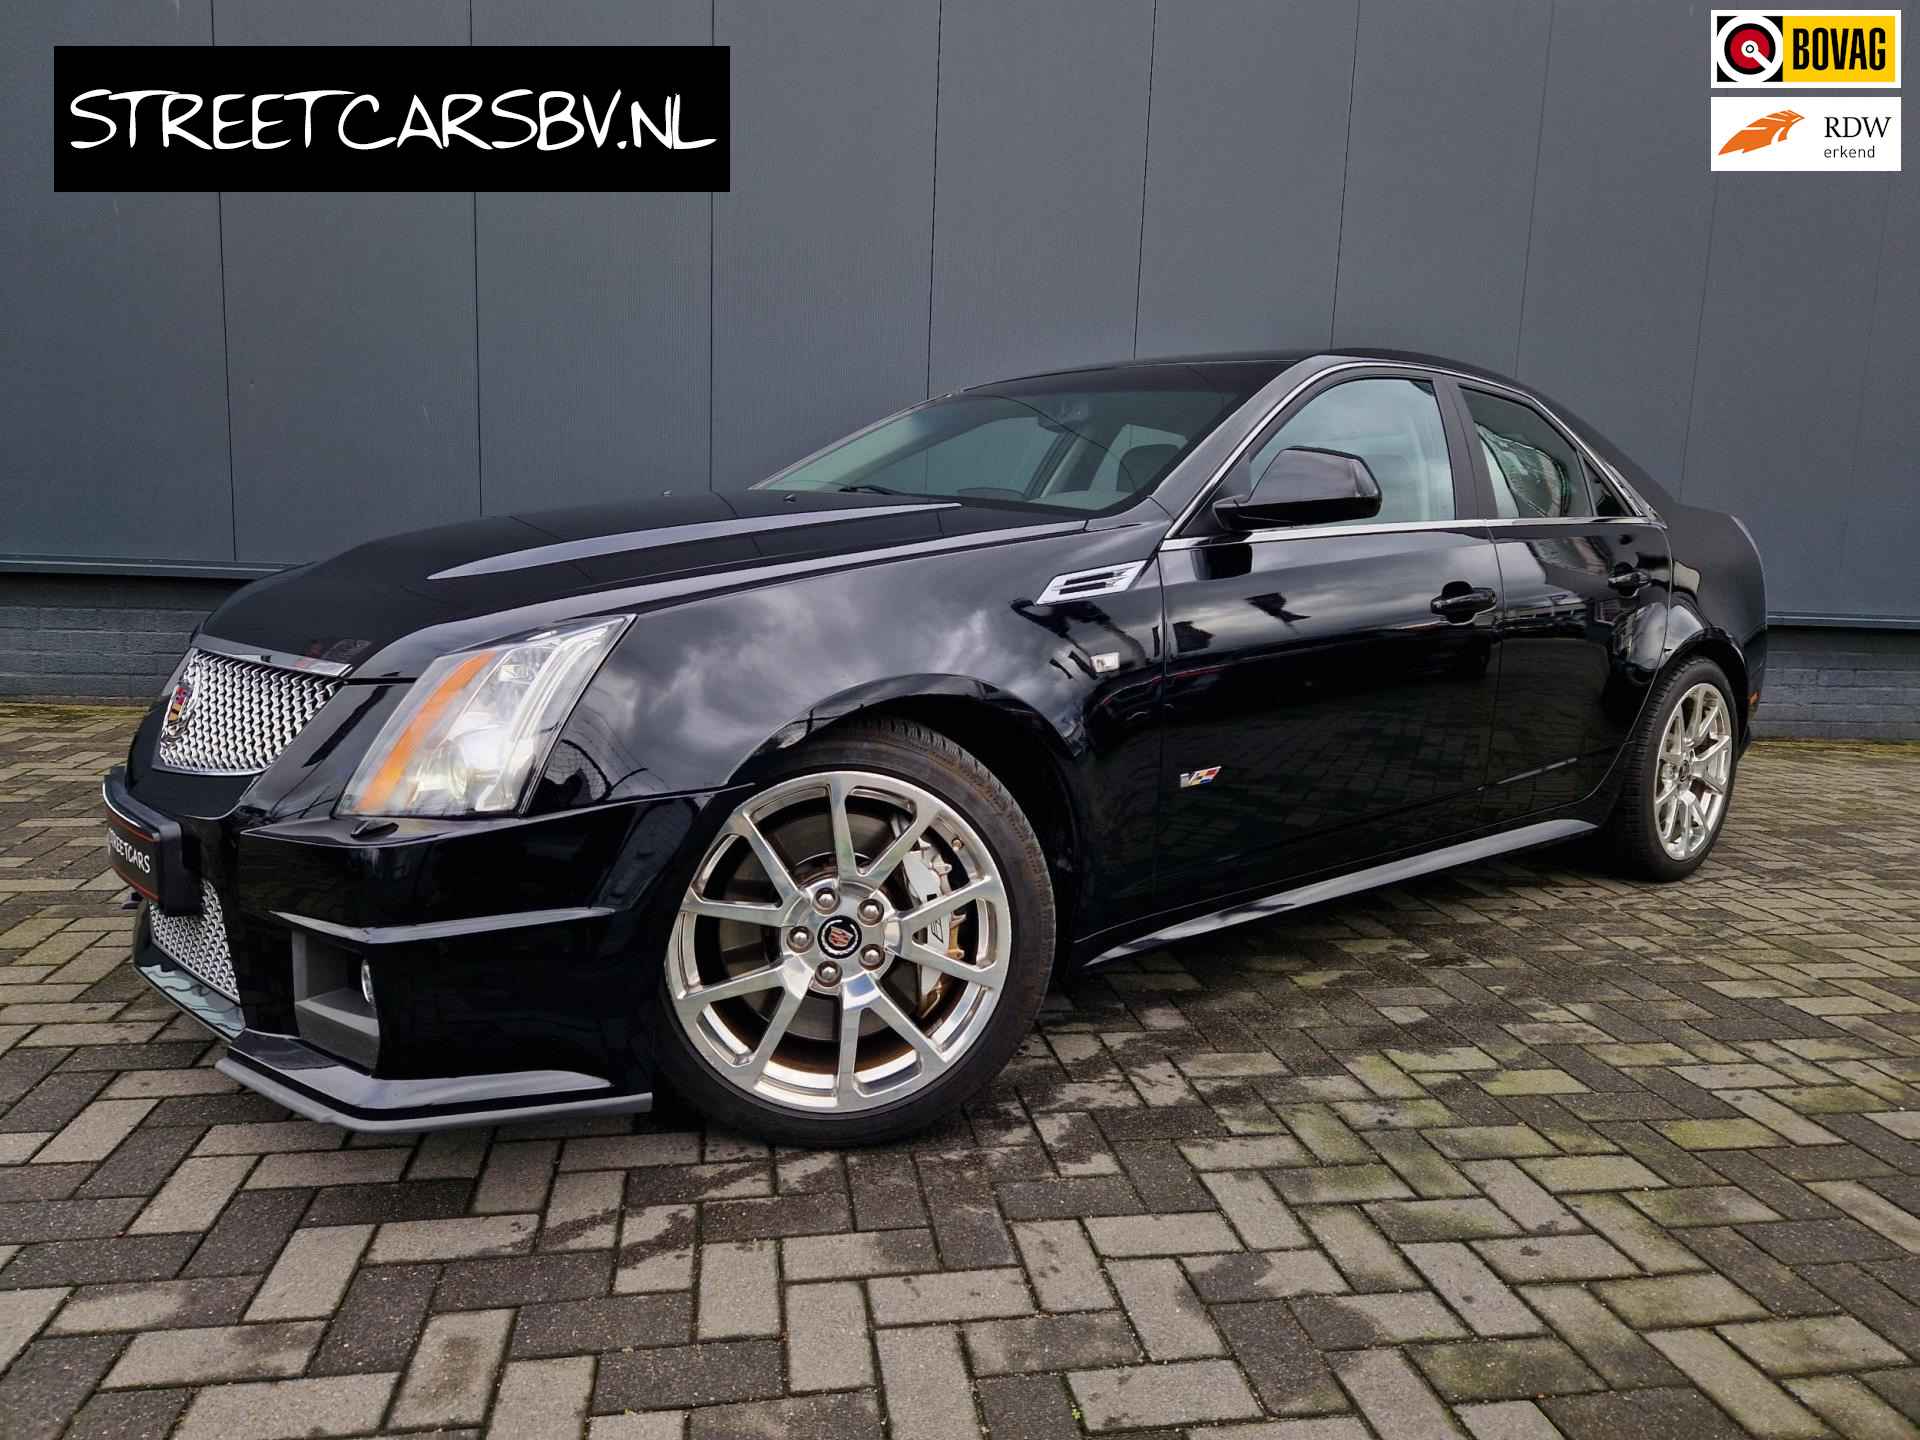 Cadillac CTS 6.2 V8 CTS-V 565pk! Europees geleverd! - 1/36